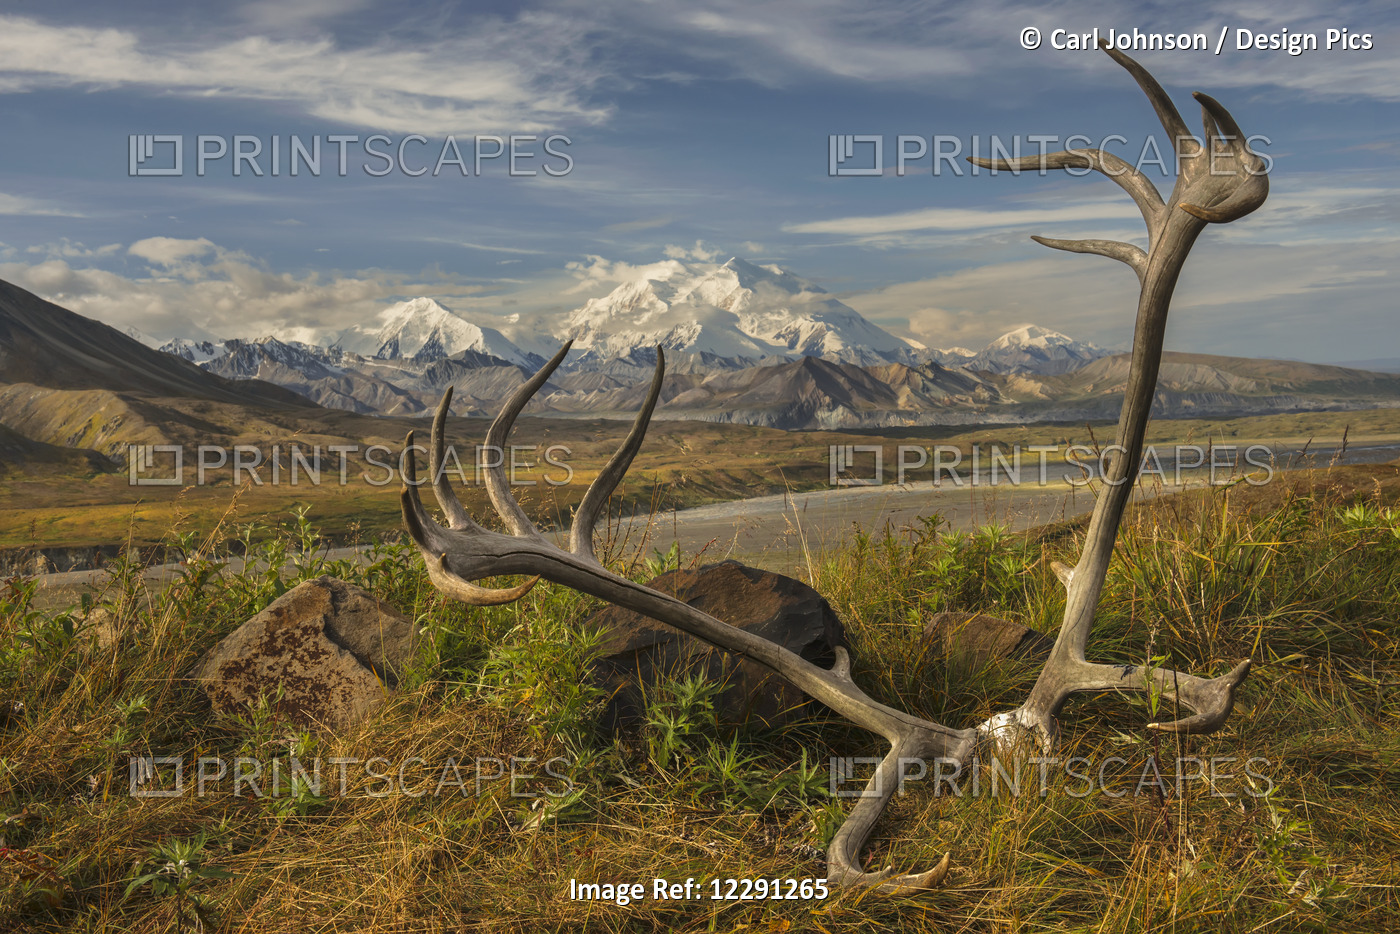 A Set Of Caribou Antlers At The Eielson Visitor Center In Denali National Park ...